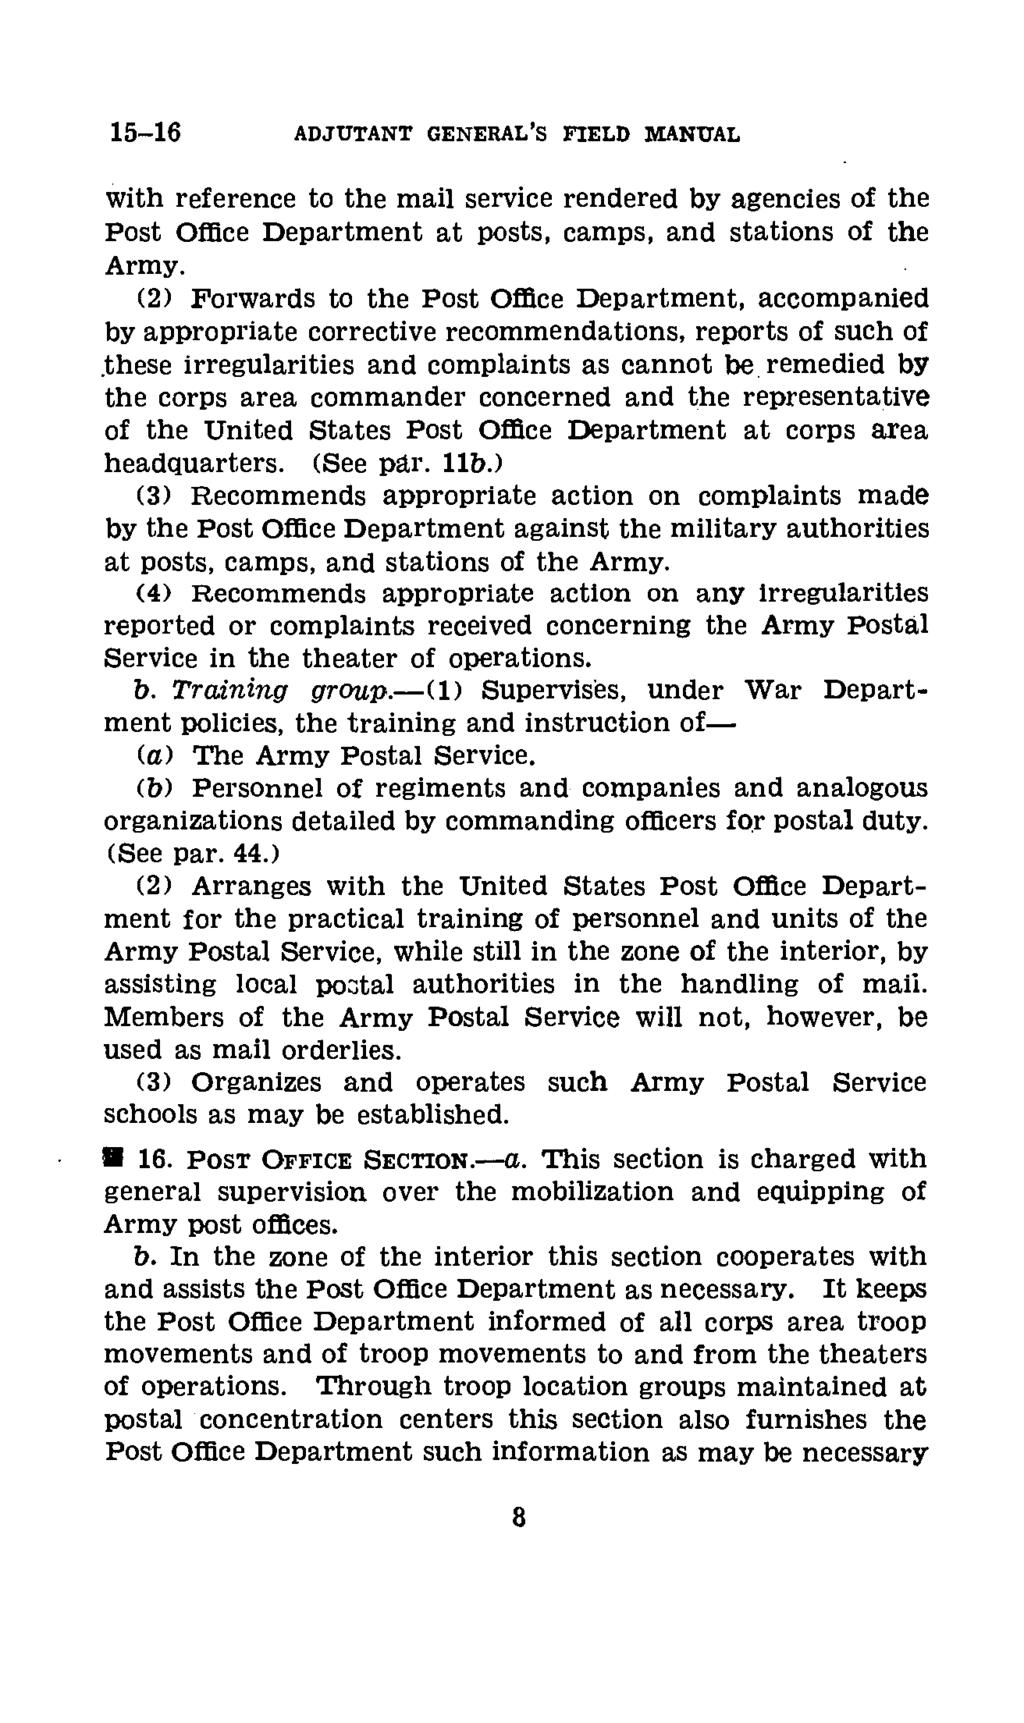 15-16 ADJUTANT GENERAL'S FIELD MANUAL with reference to the mail service rendered by agencies of the Post Office Department at posts, camps, and stations of the Army.